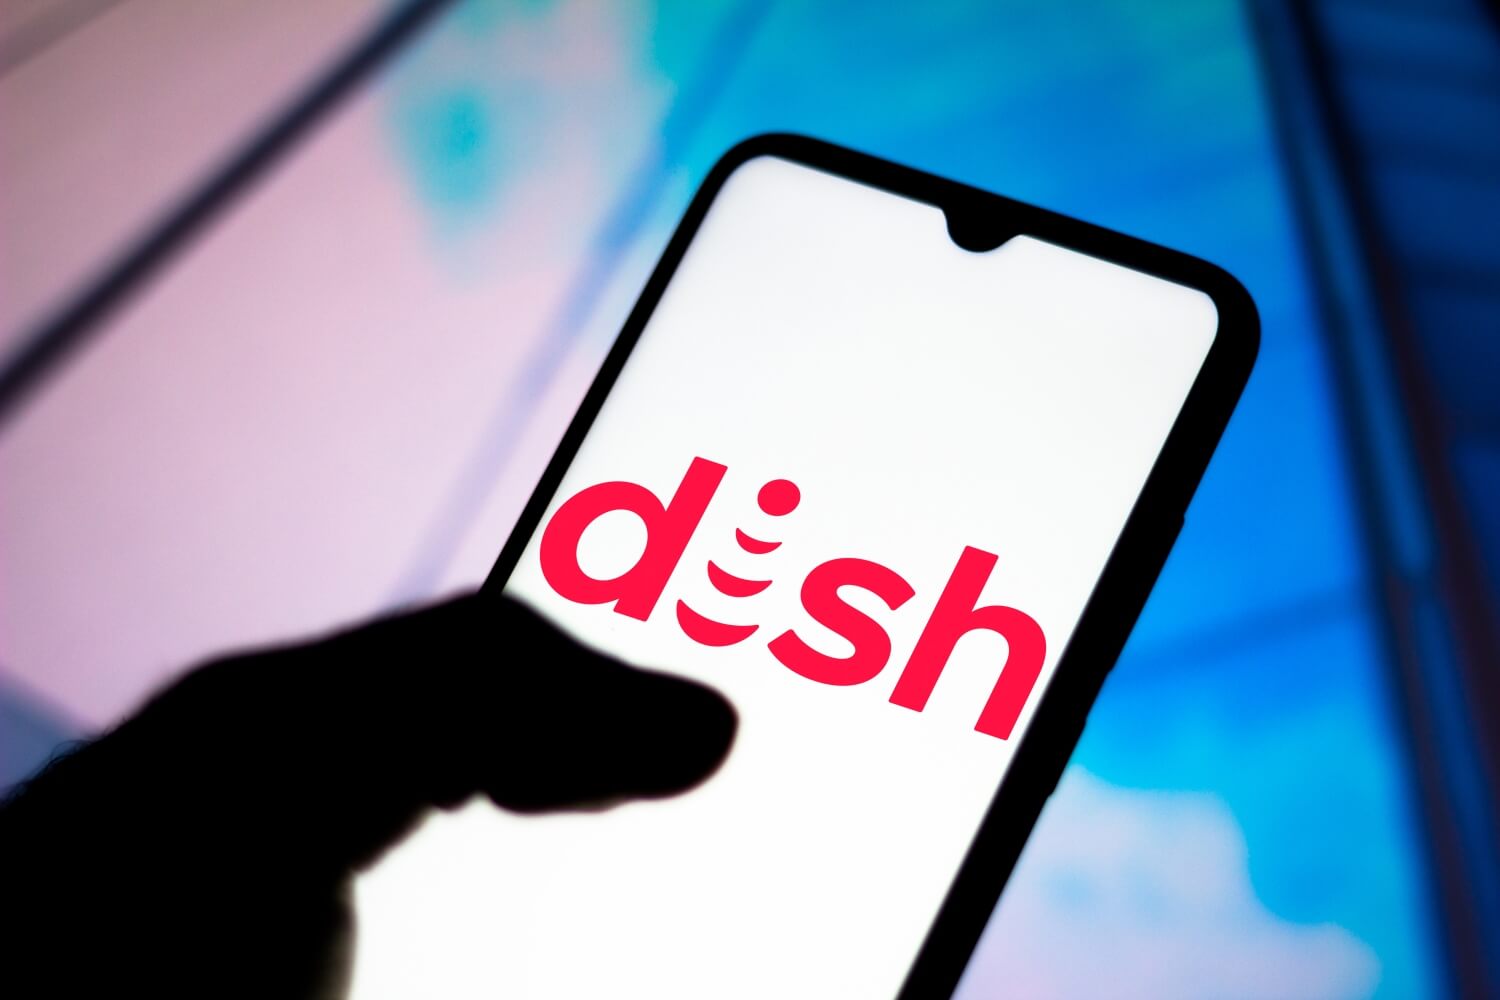 Dish completes acquisition of pre-paid carrier Boost Mobile for $1.4 billion